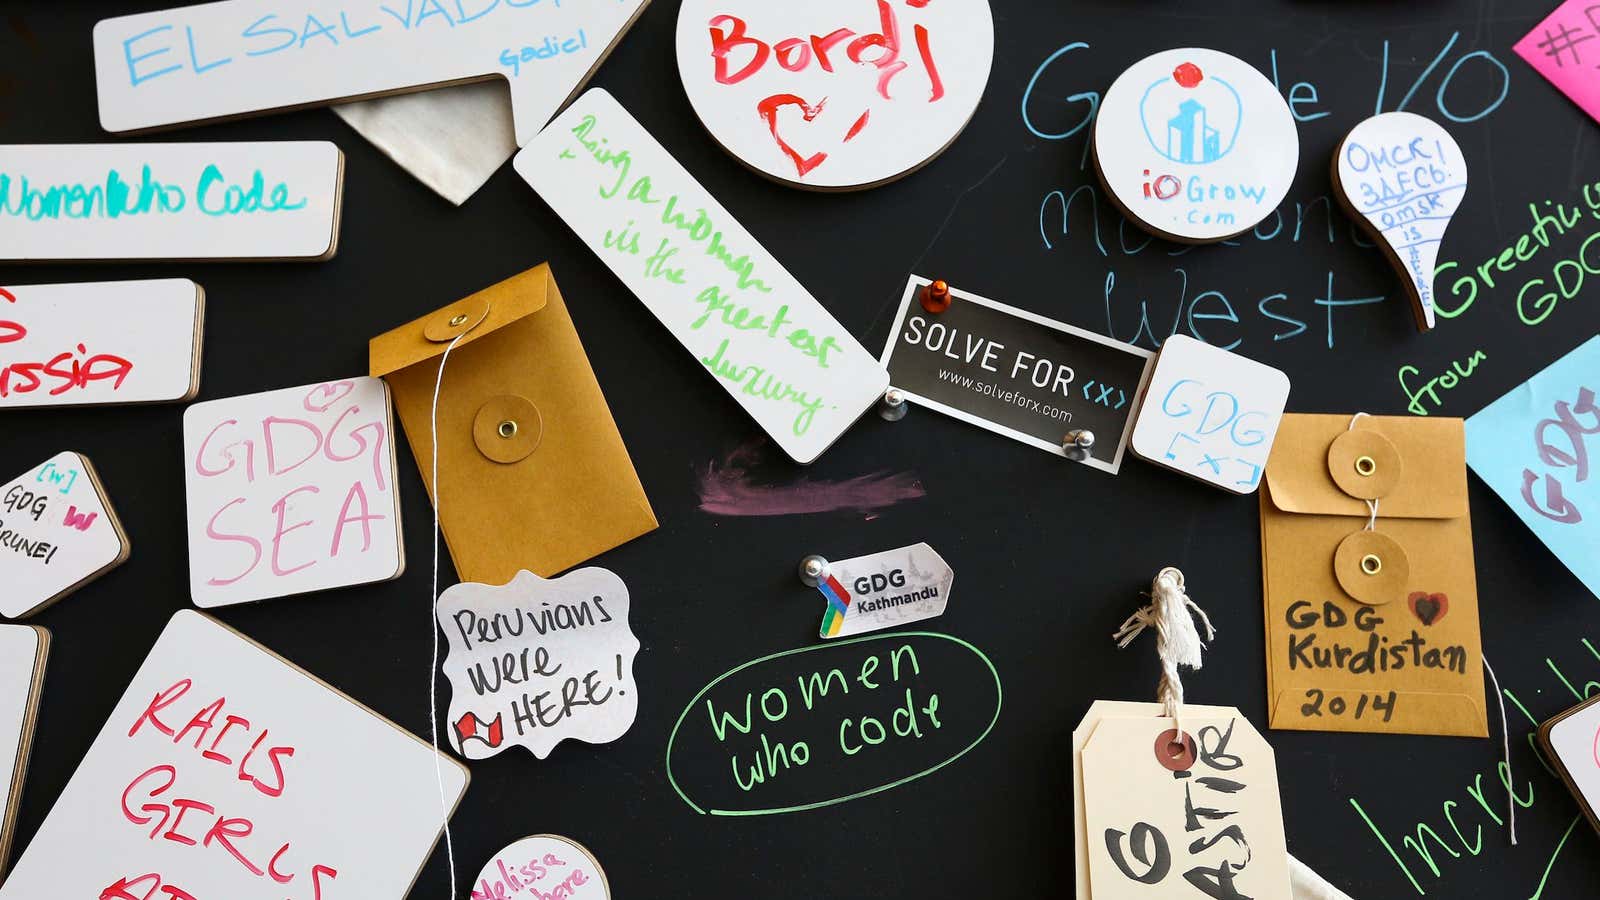 A board of notes by women attending the Google I/O developers conference in San Francisco in June.